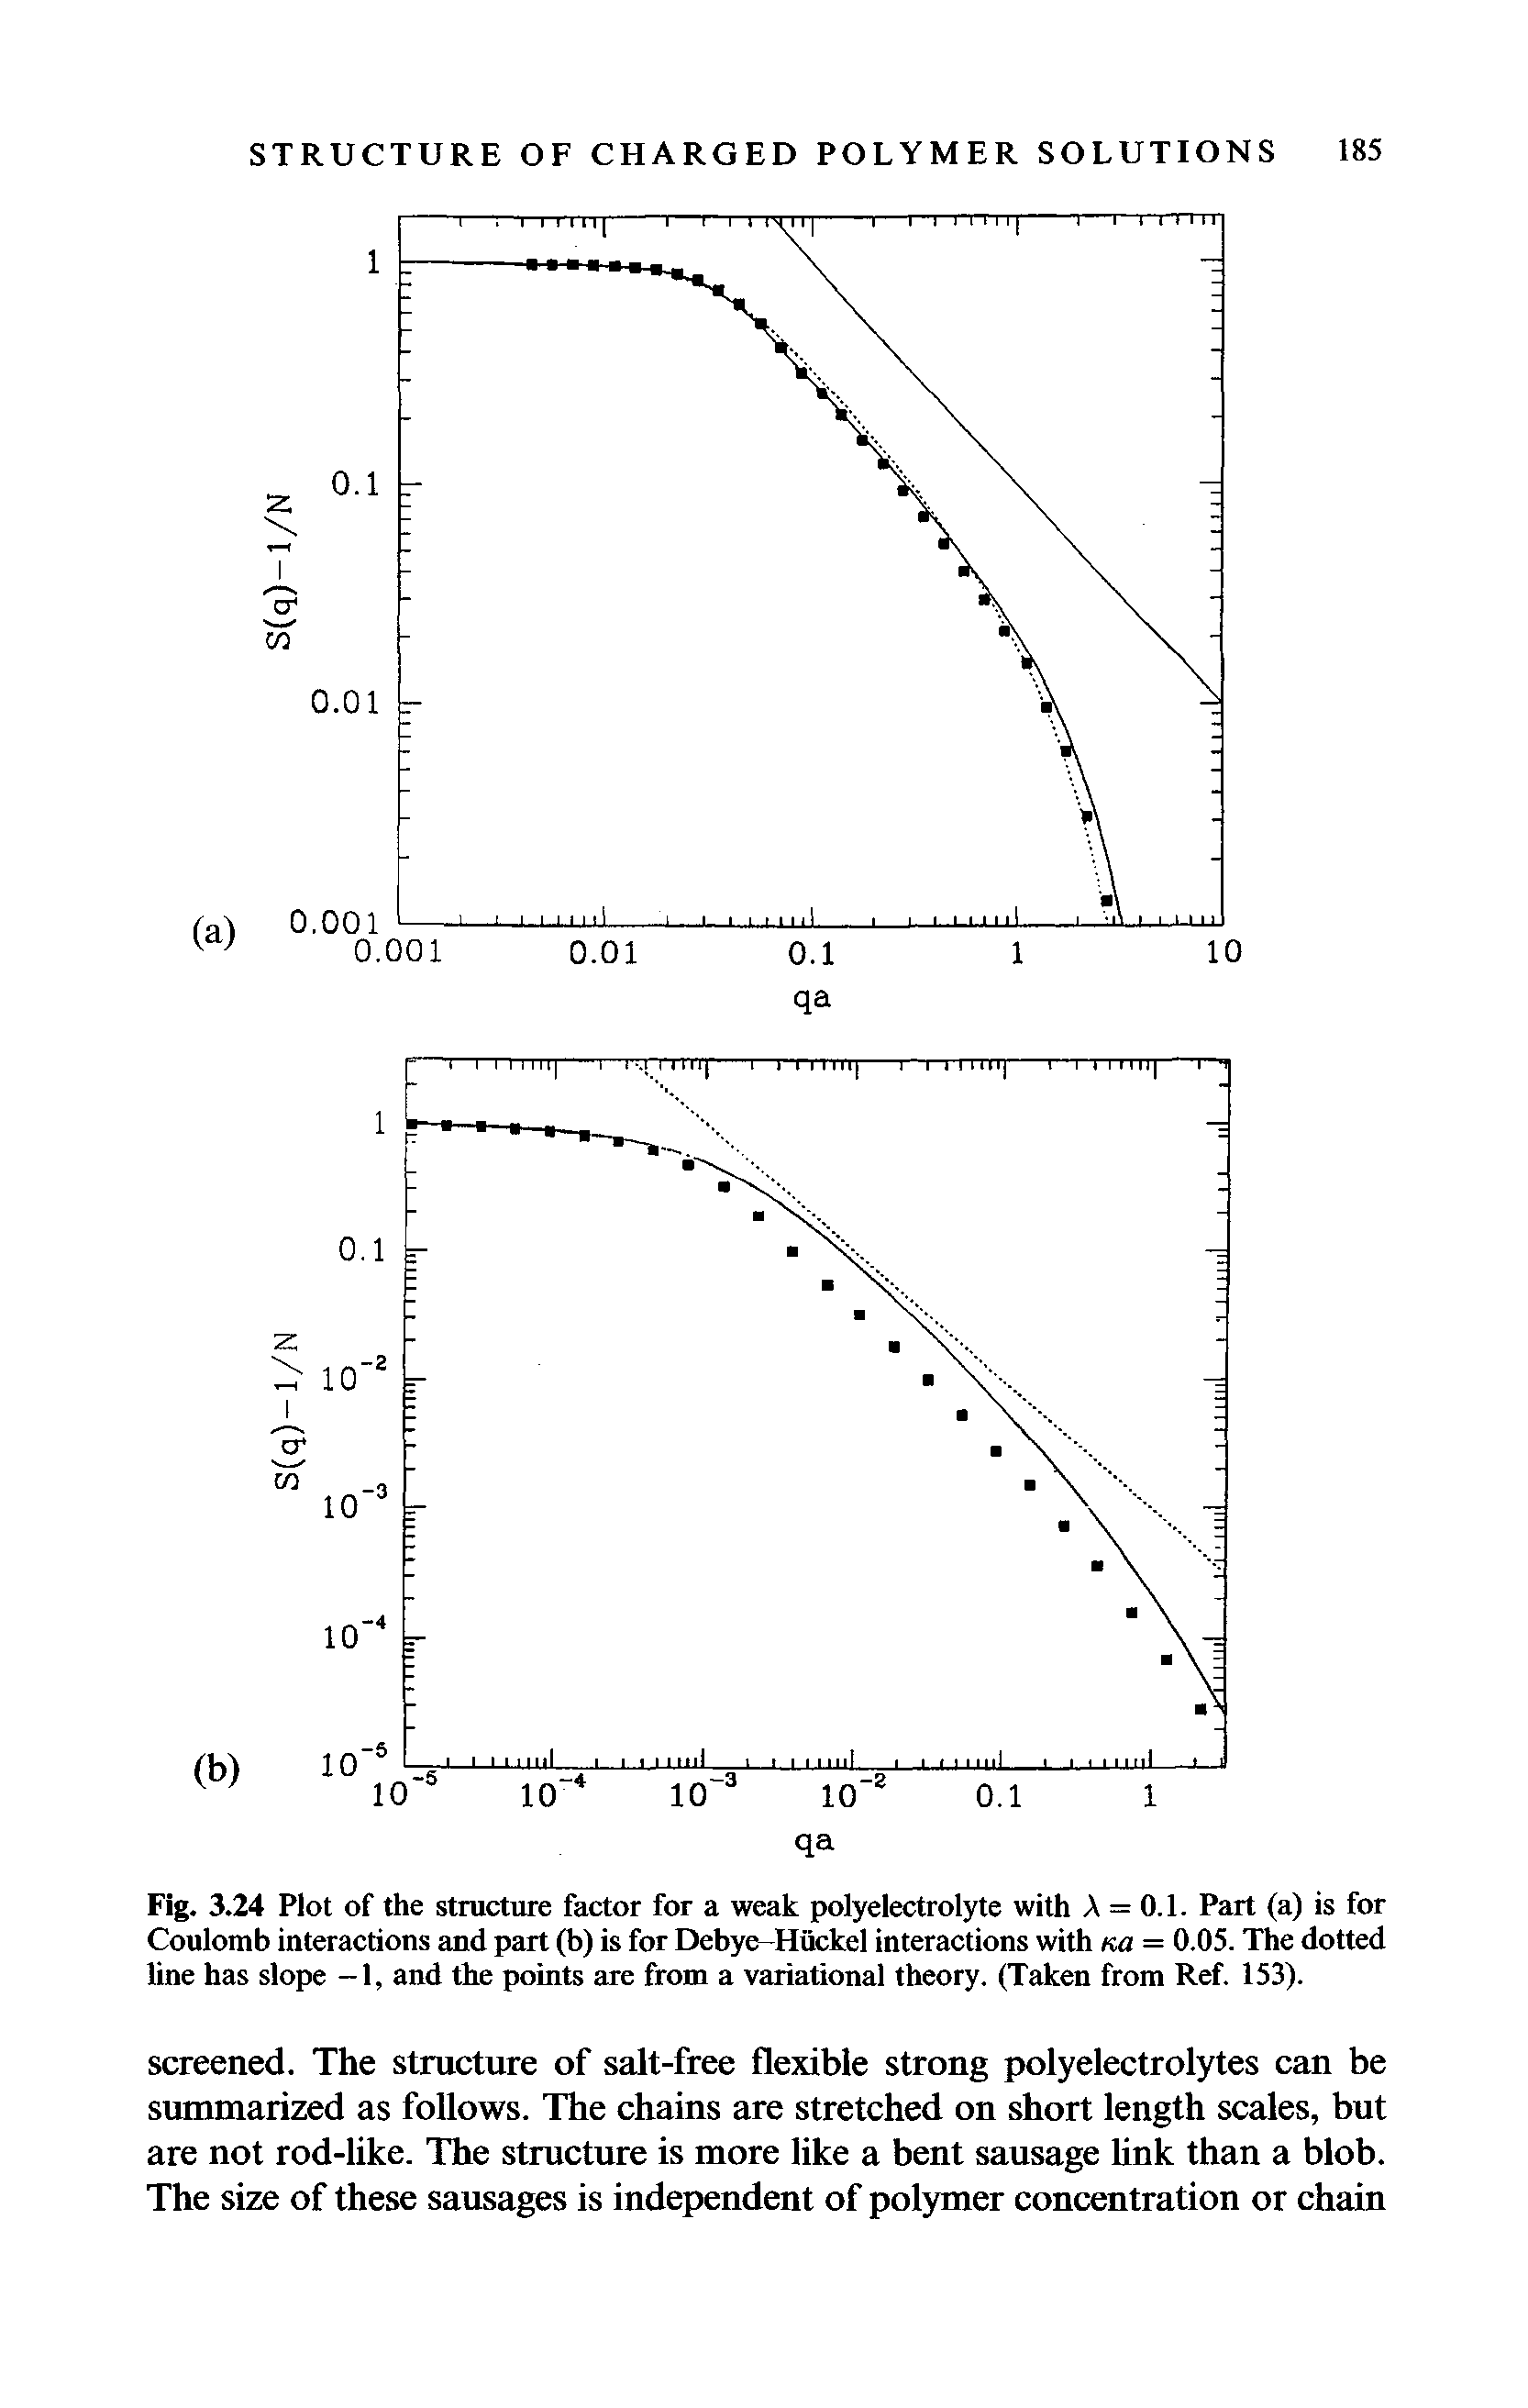 Fig. 3.24 Plot of the structure factor for a weak polyelectrolyte with A = 0.1. Part (a) is for Coulomb interactions and part (b) is for Debye-Huckel interactions with ko = 0.05. The dotted line has slope -1, and the points are from a variational theory. (Taken from Ref. 153).